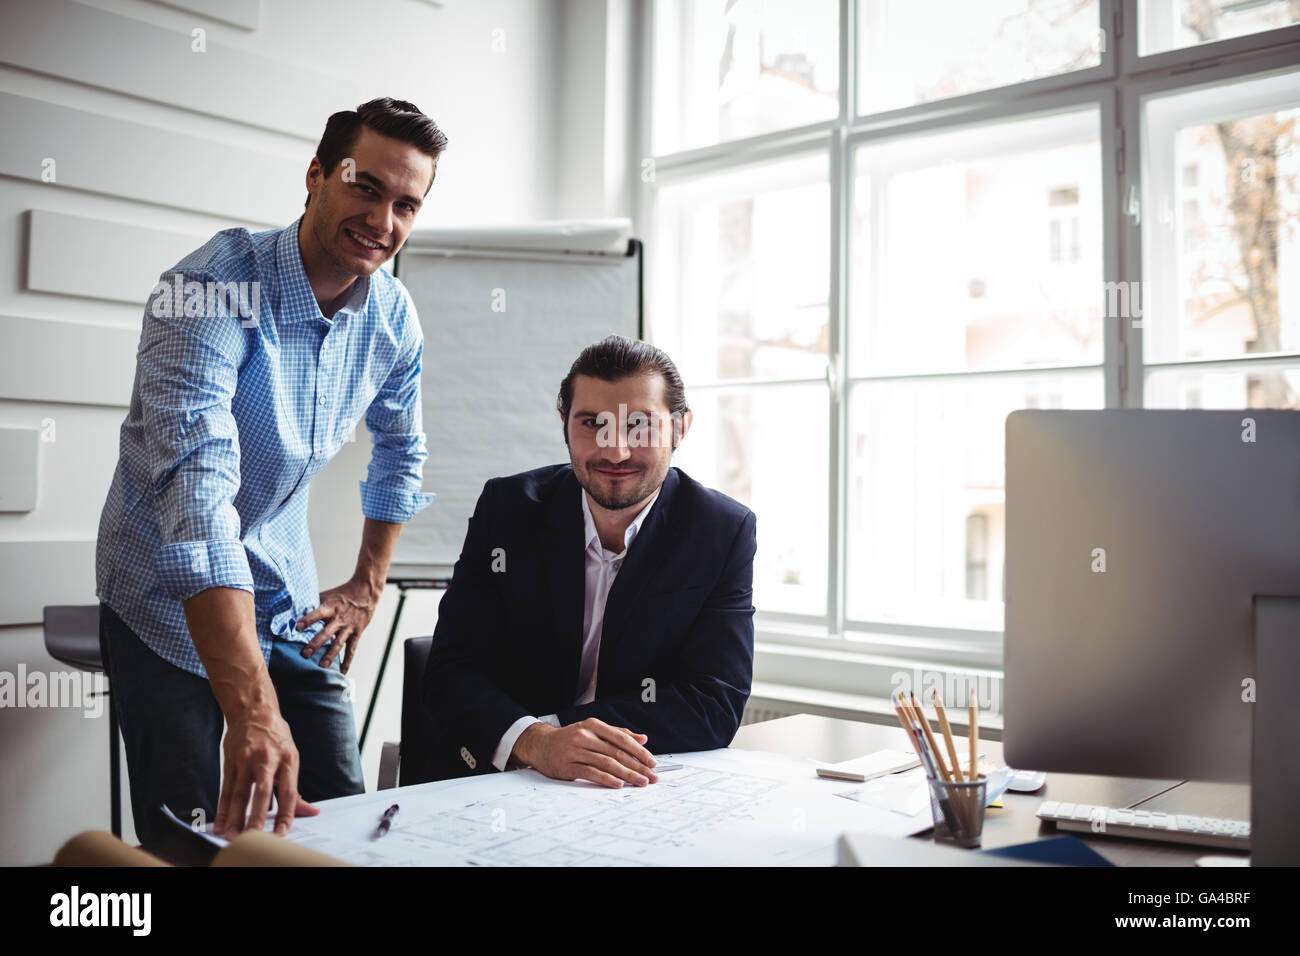 smiling interior designer with coworker working on blueprint Stock Photo